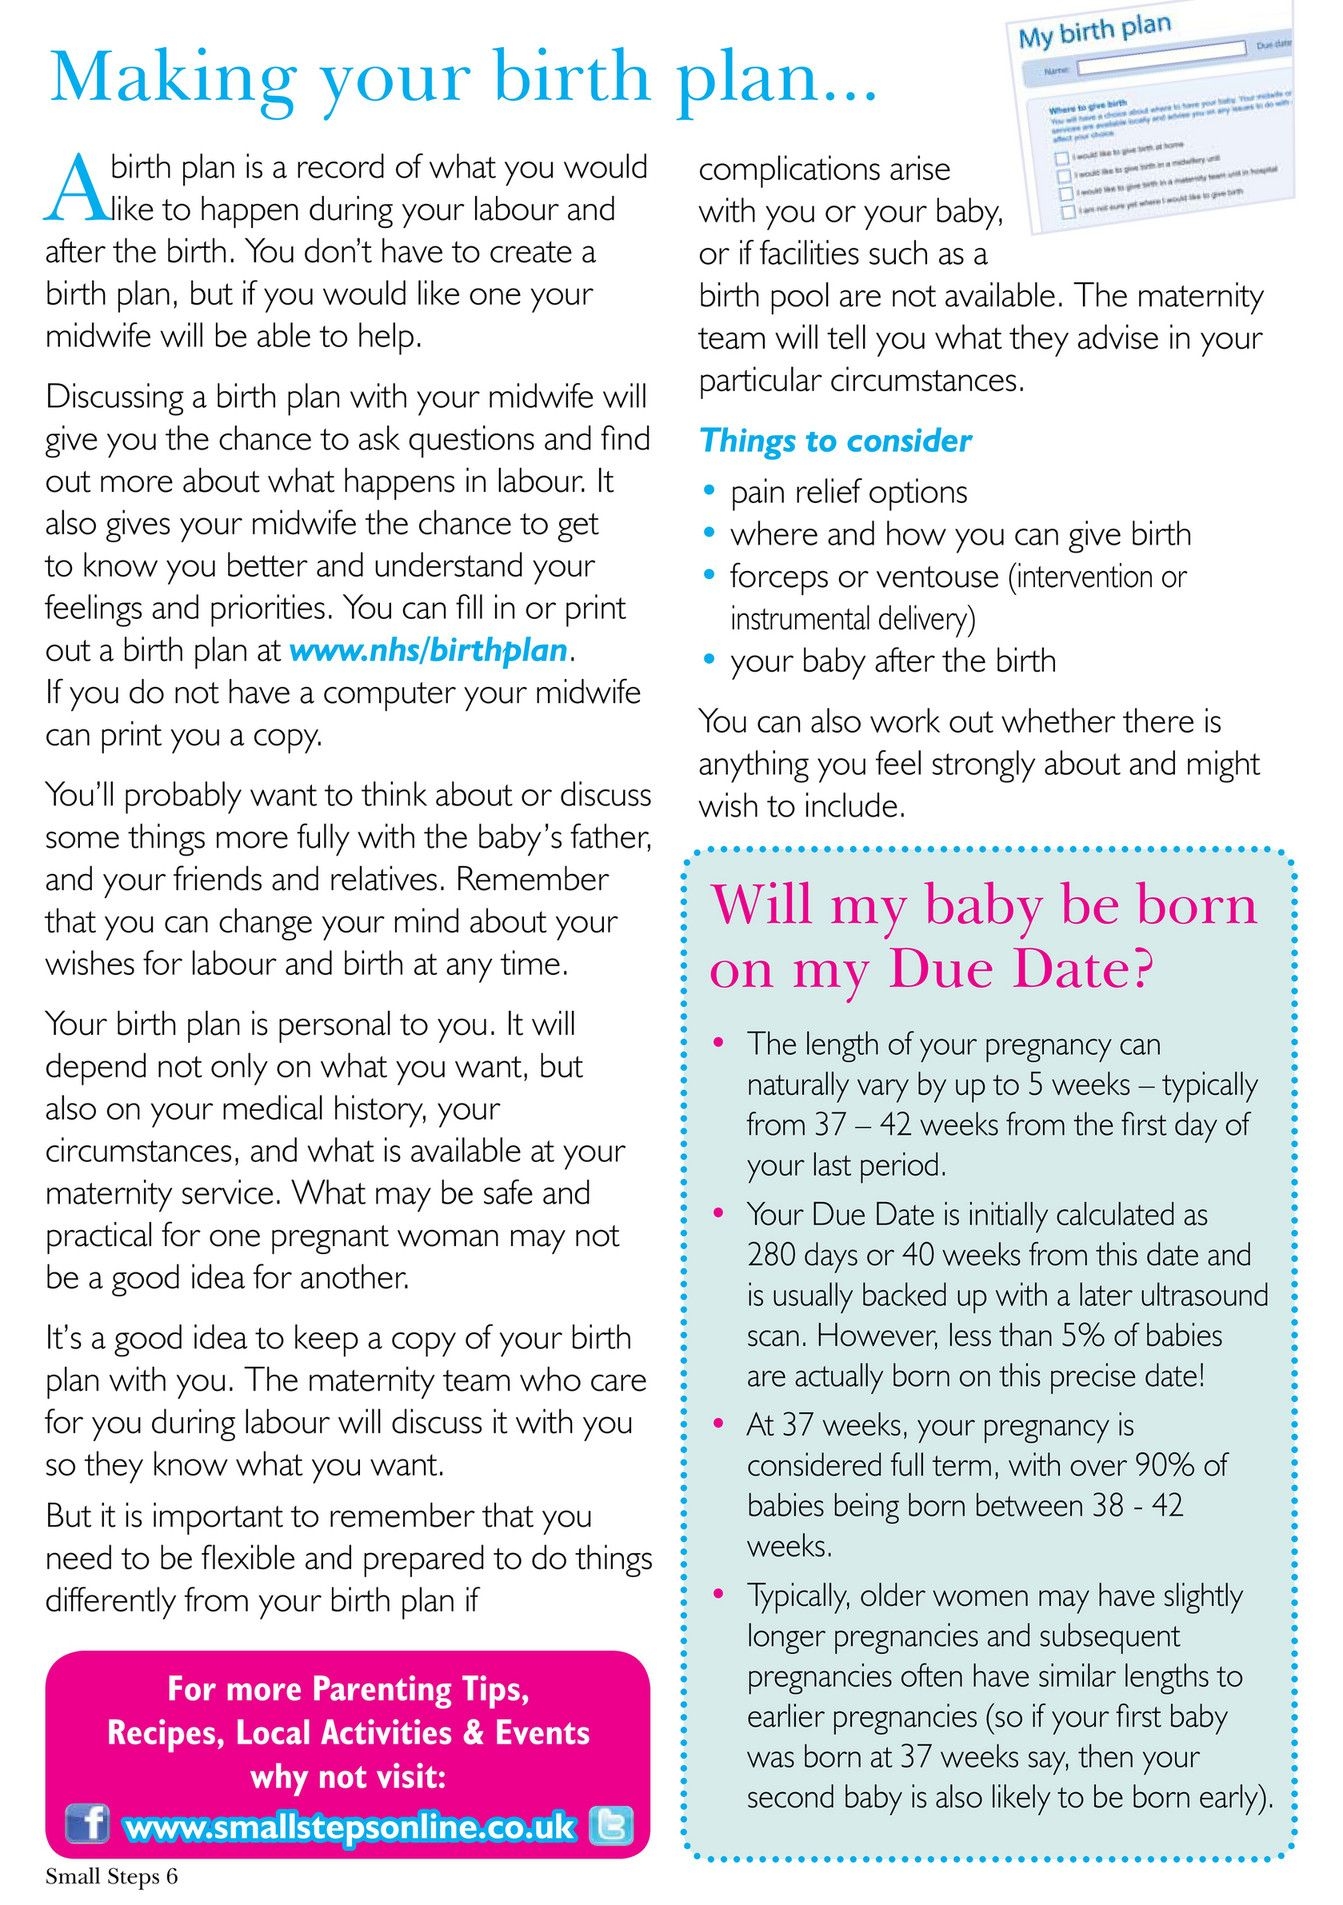 Small Steps Online - Worcestershire_17_18 - Page 6-7